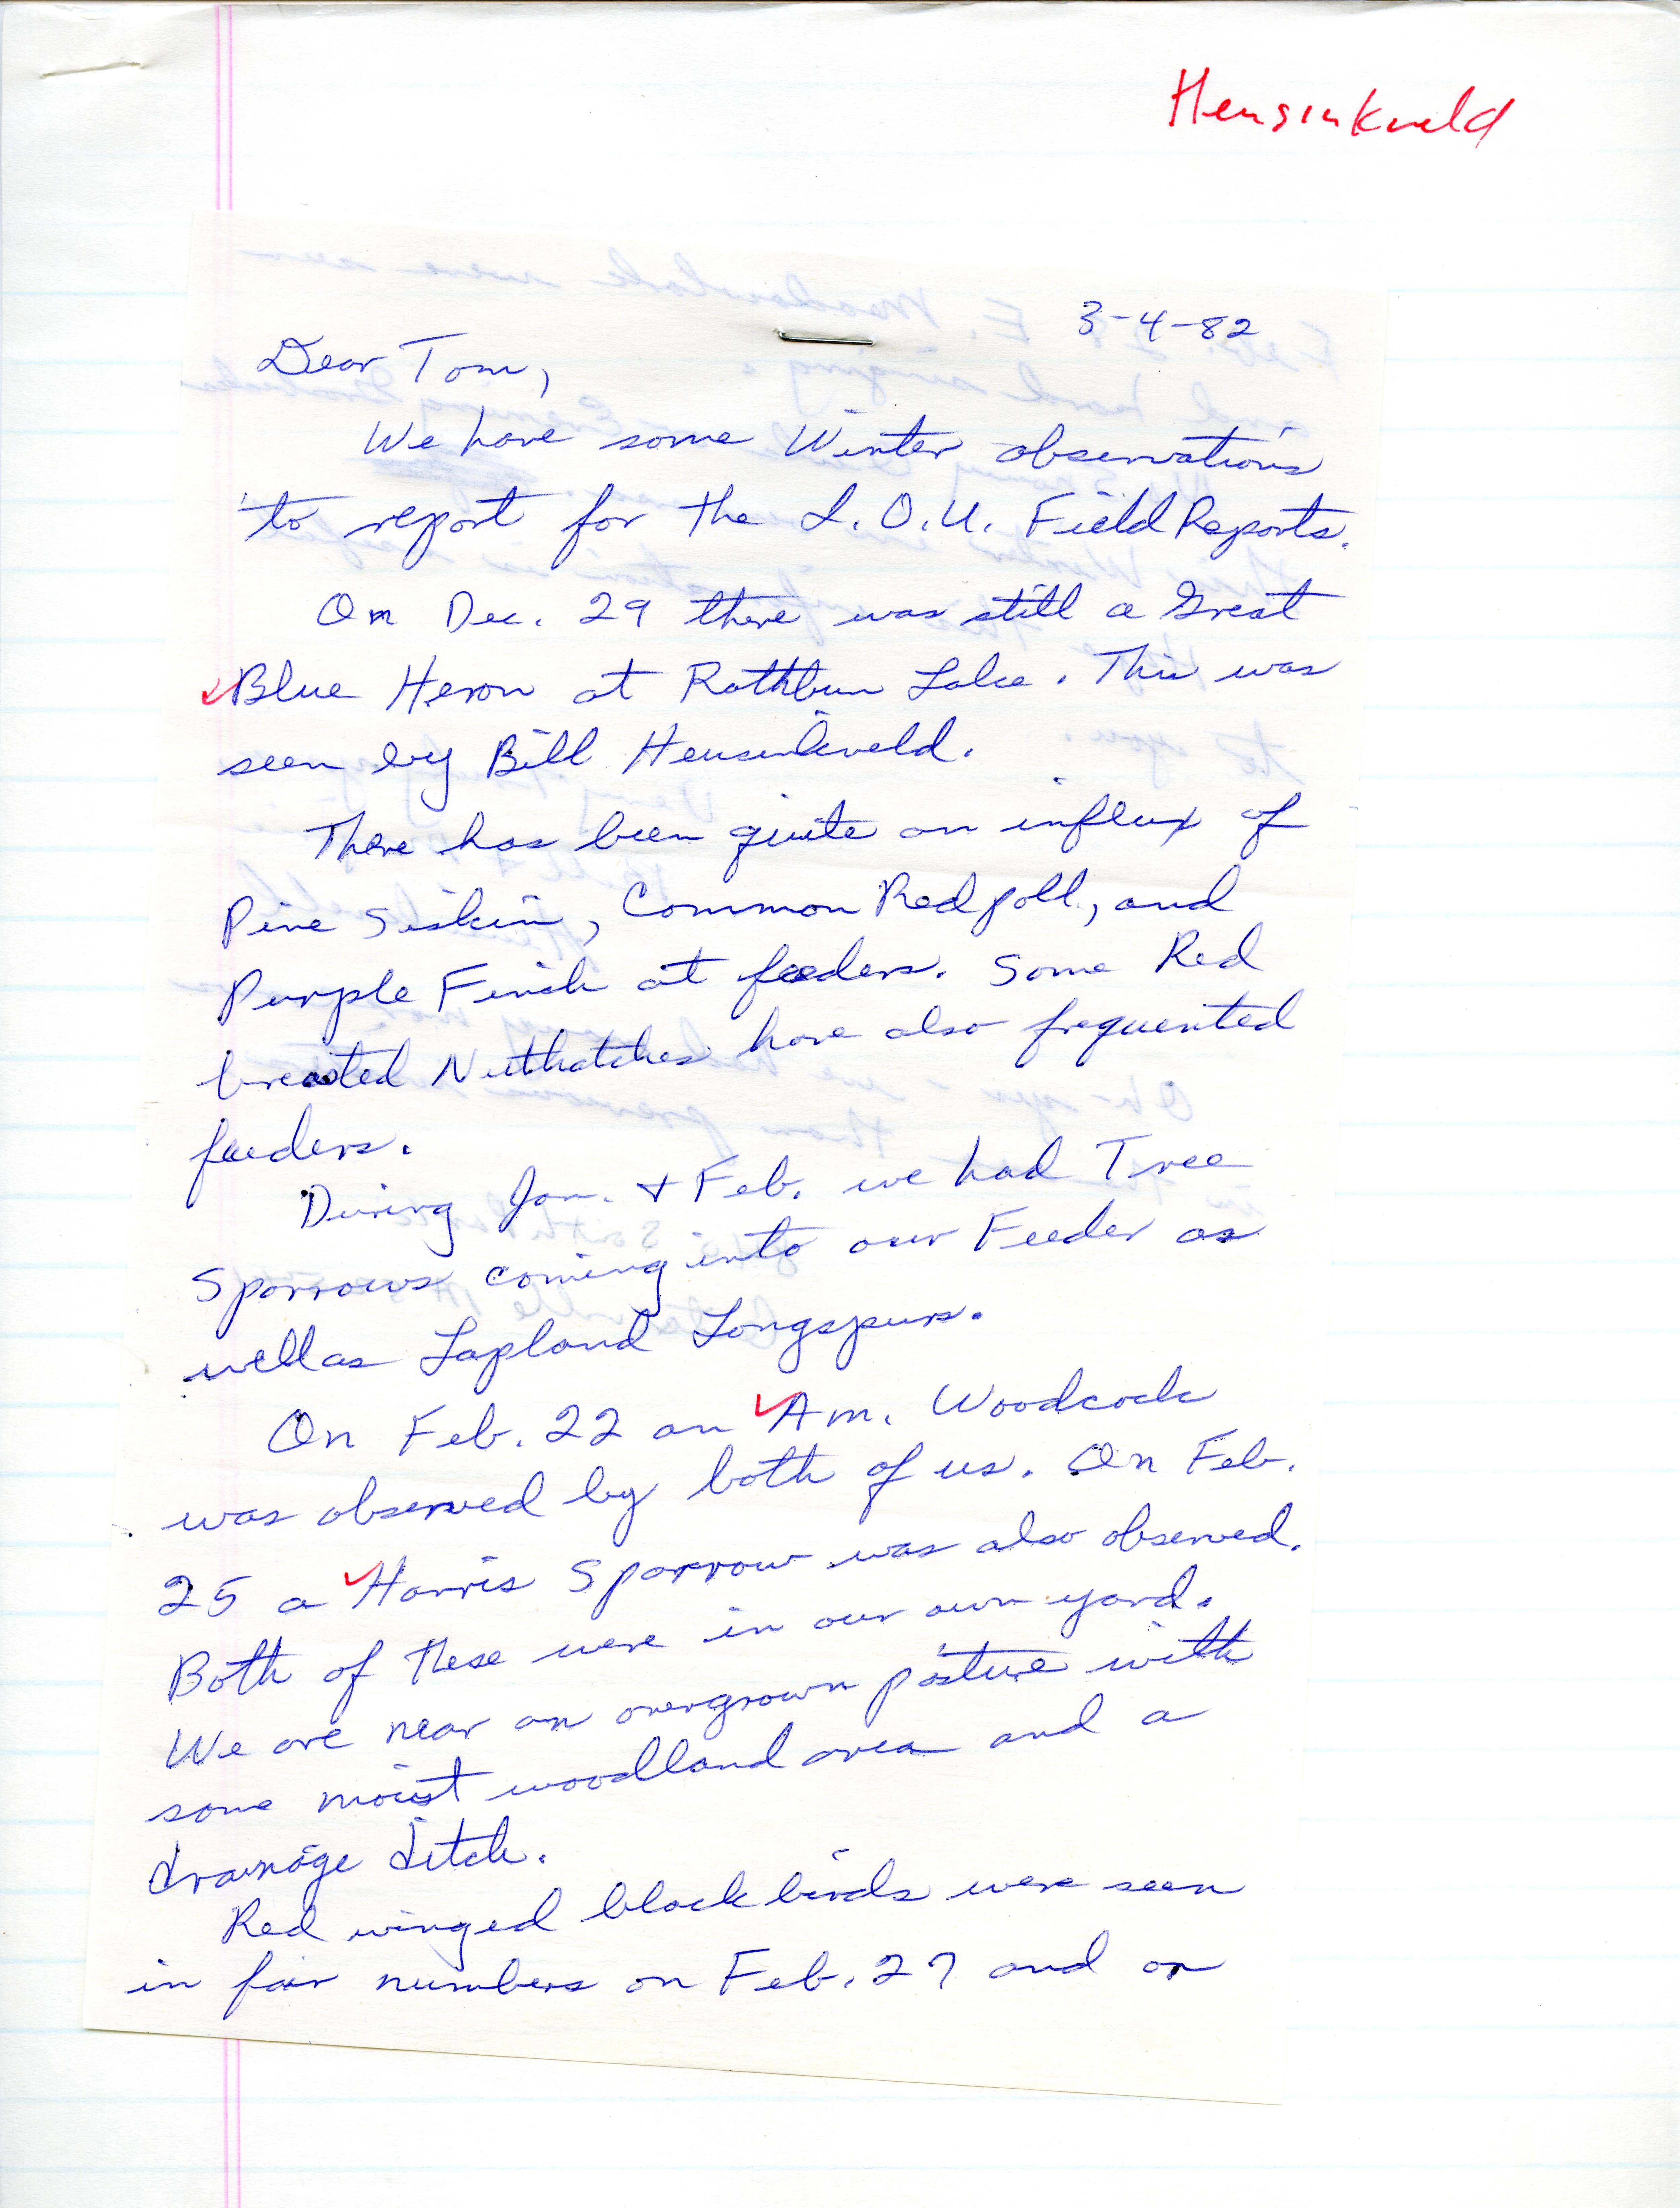 Bill and Marjorie Heusinkveld letter to Thomas H. Kent regarding field notes and accompanying documentation, March 4, 1982